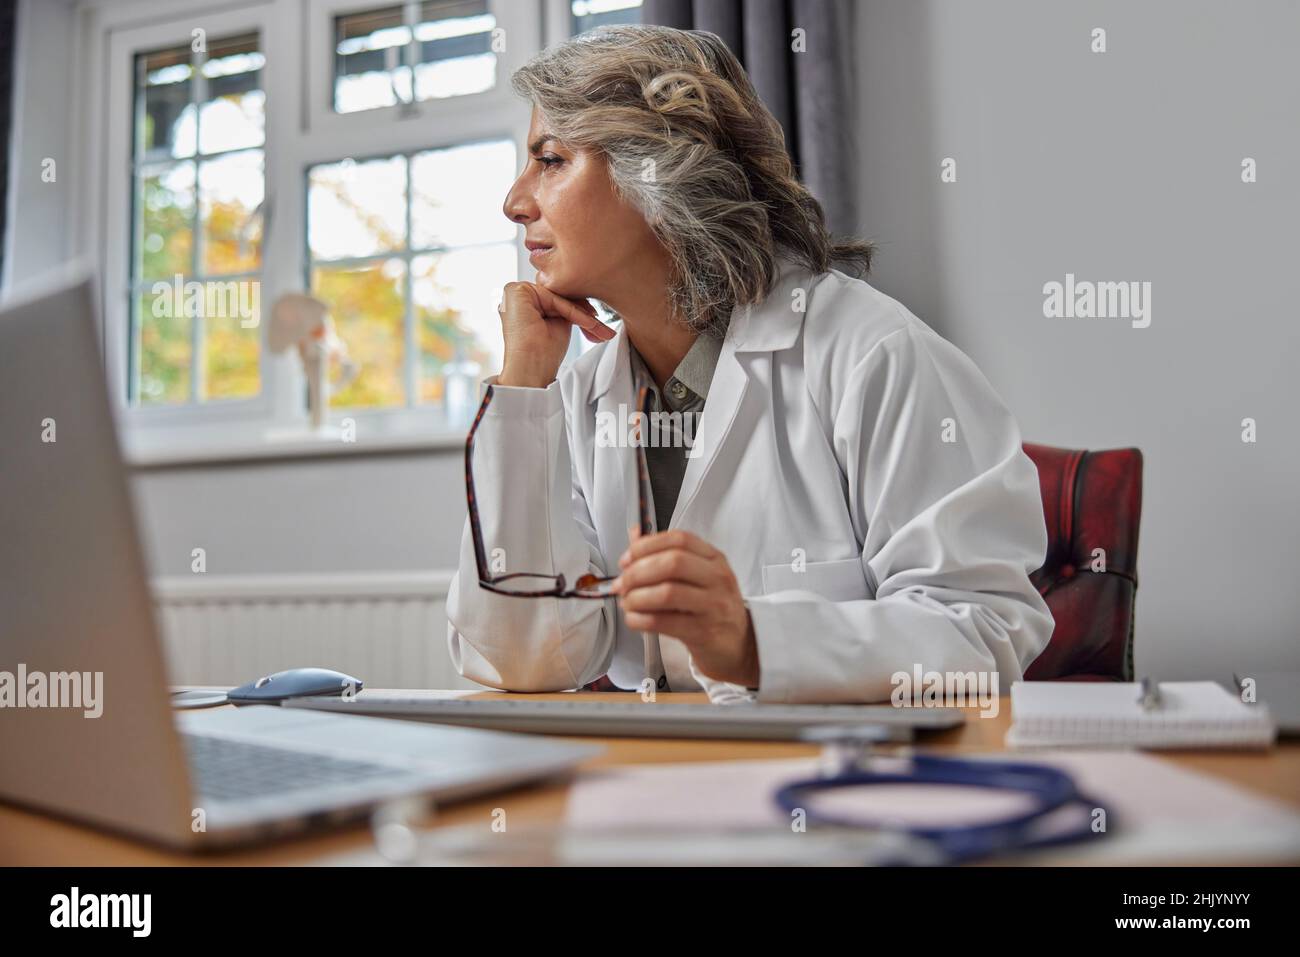 Stressed And Overworked Mature Female Doctor Wearing White Coat At Desk In Doctors Office Stock Photo